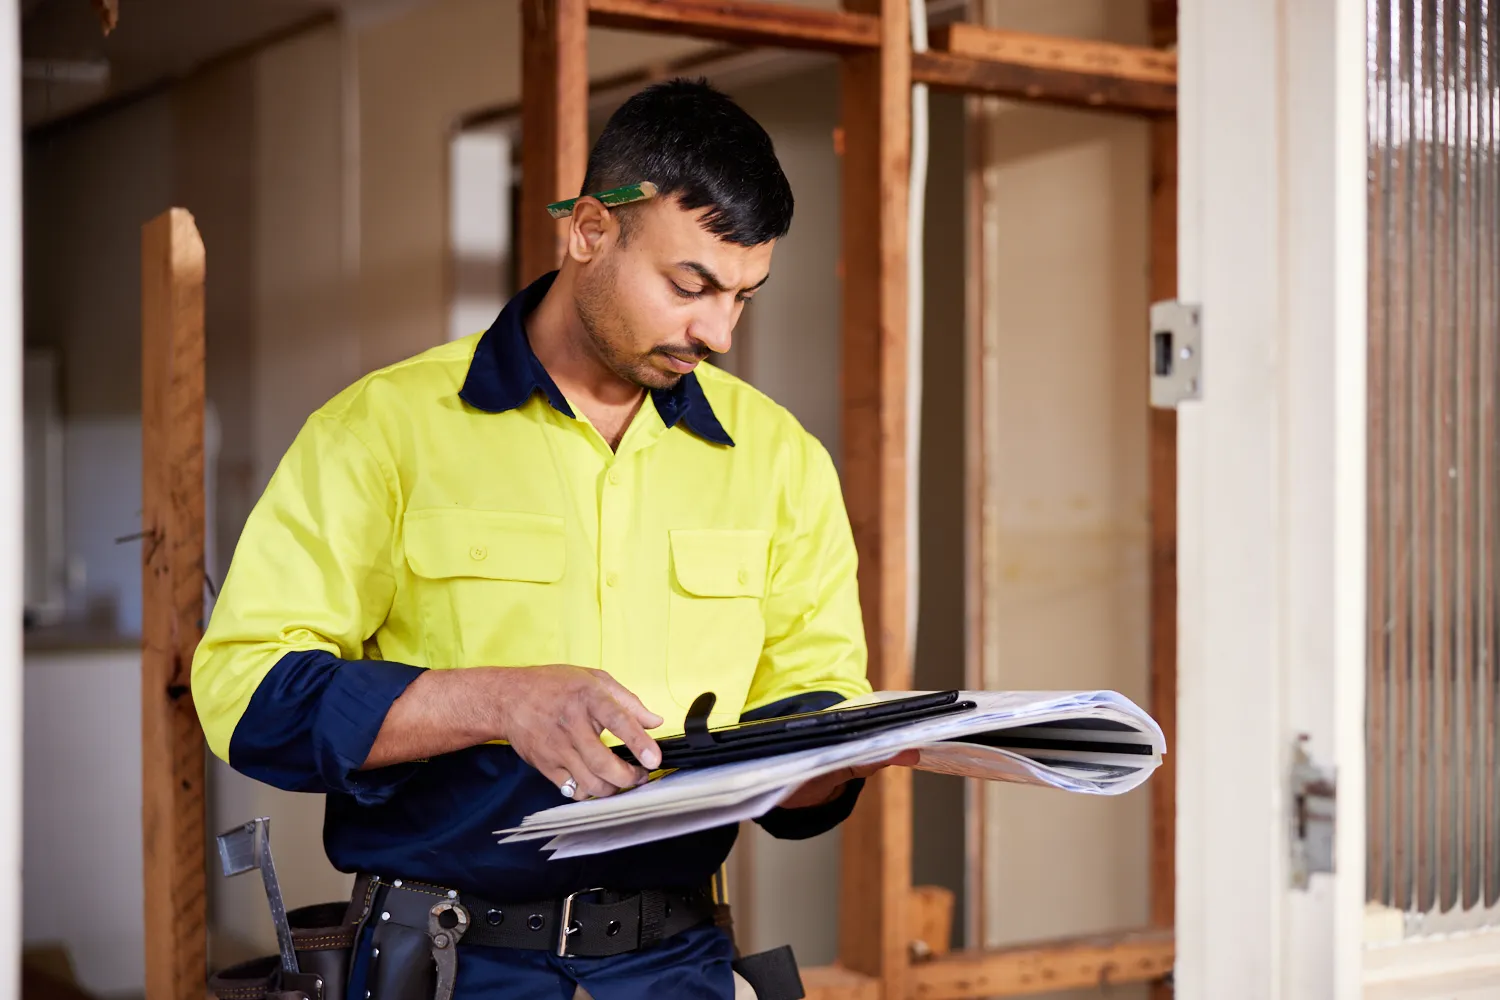 A builder wearing hi-vis clothing standing in a worksite reading paperwork and holding a mobile device